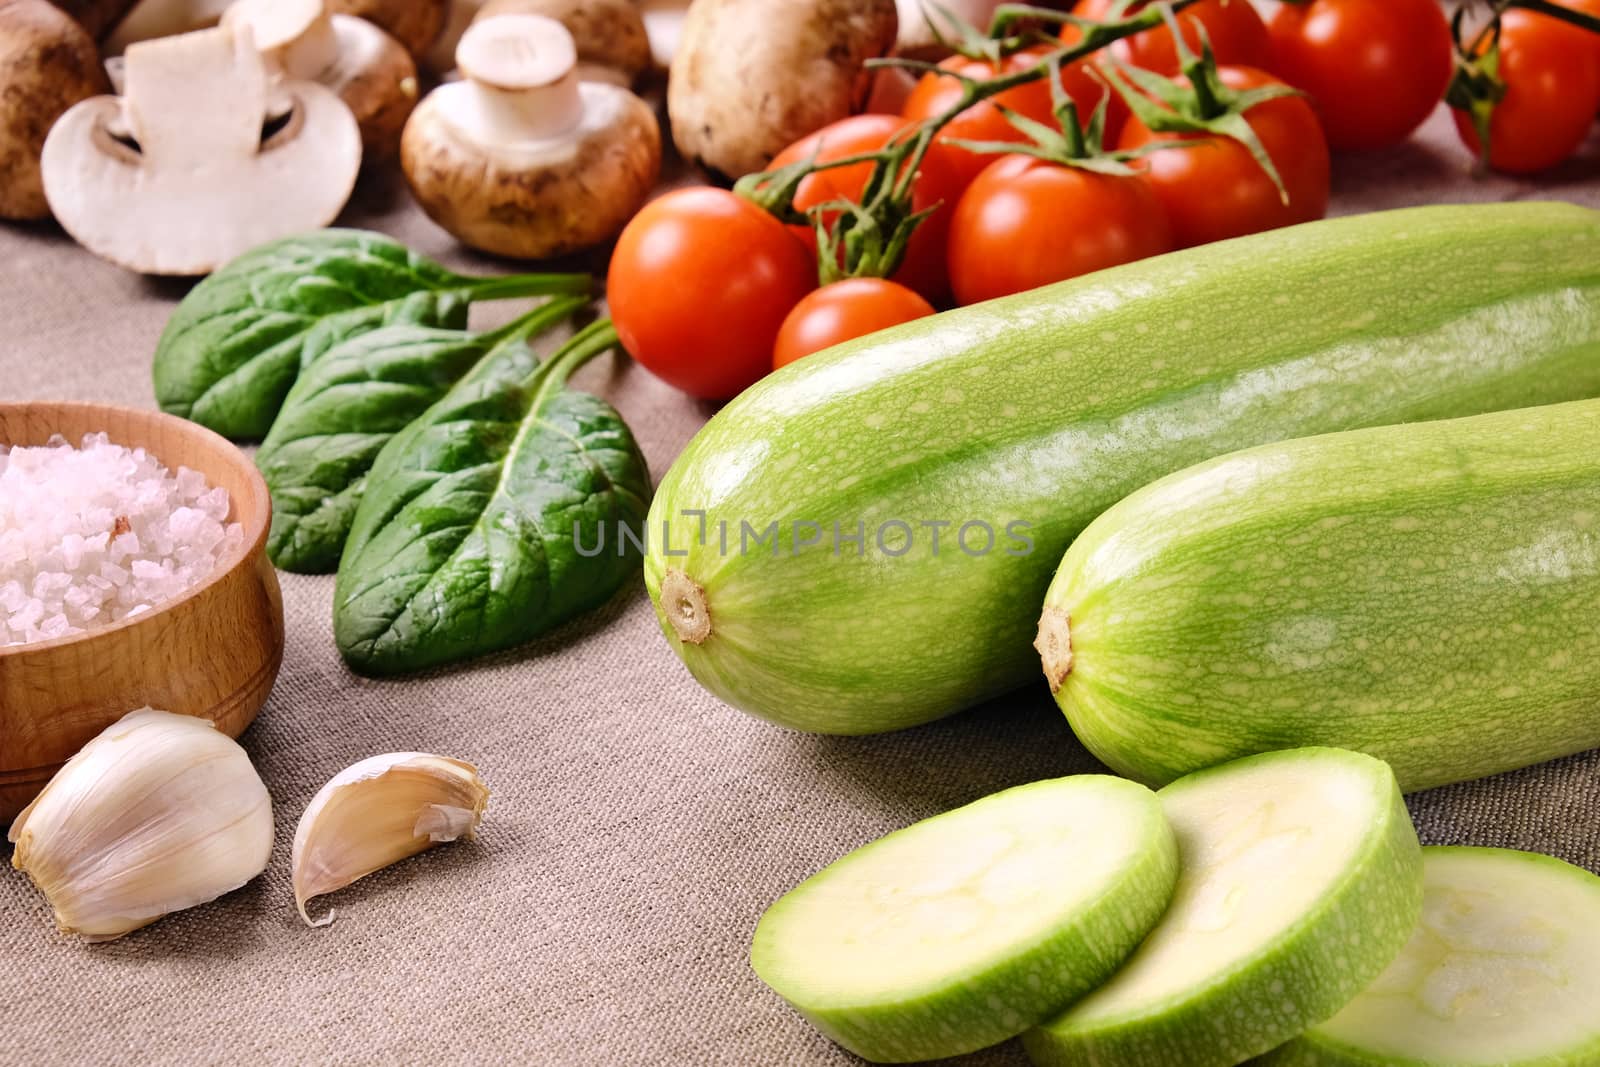 Two whole zucchini and a few sliced pieces, cherry tomatoes, mushrooms, salt in wooden salt shaker, cloves of garlic and spinach leaves on a linen cloth.